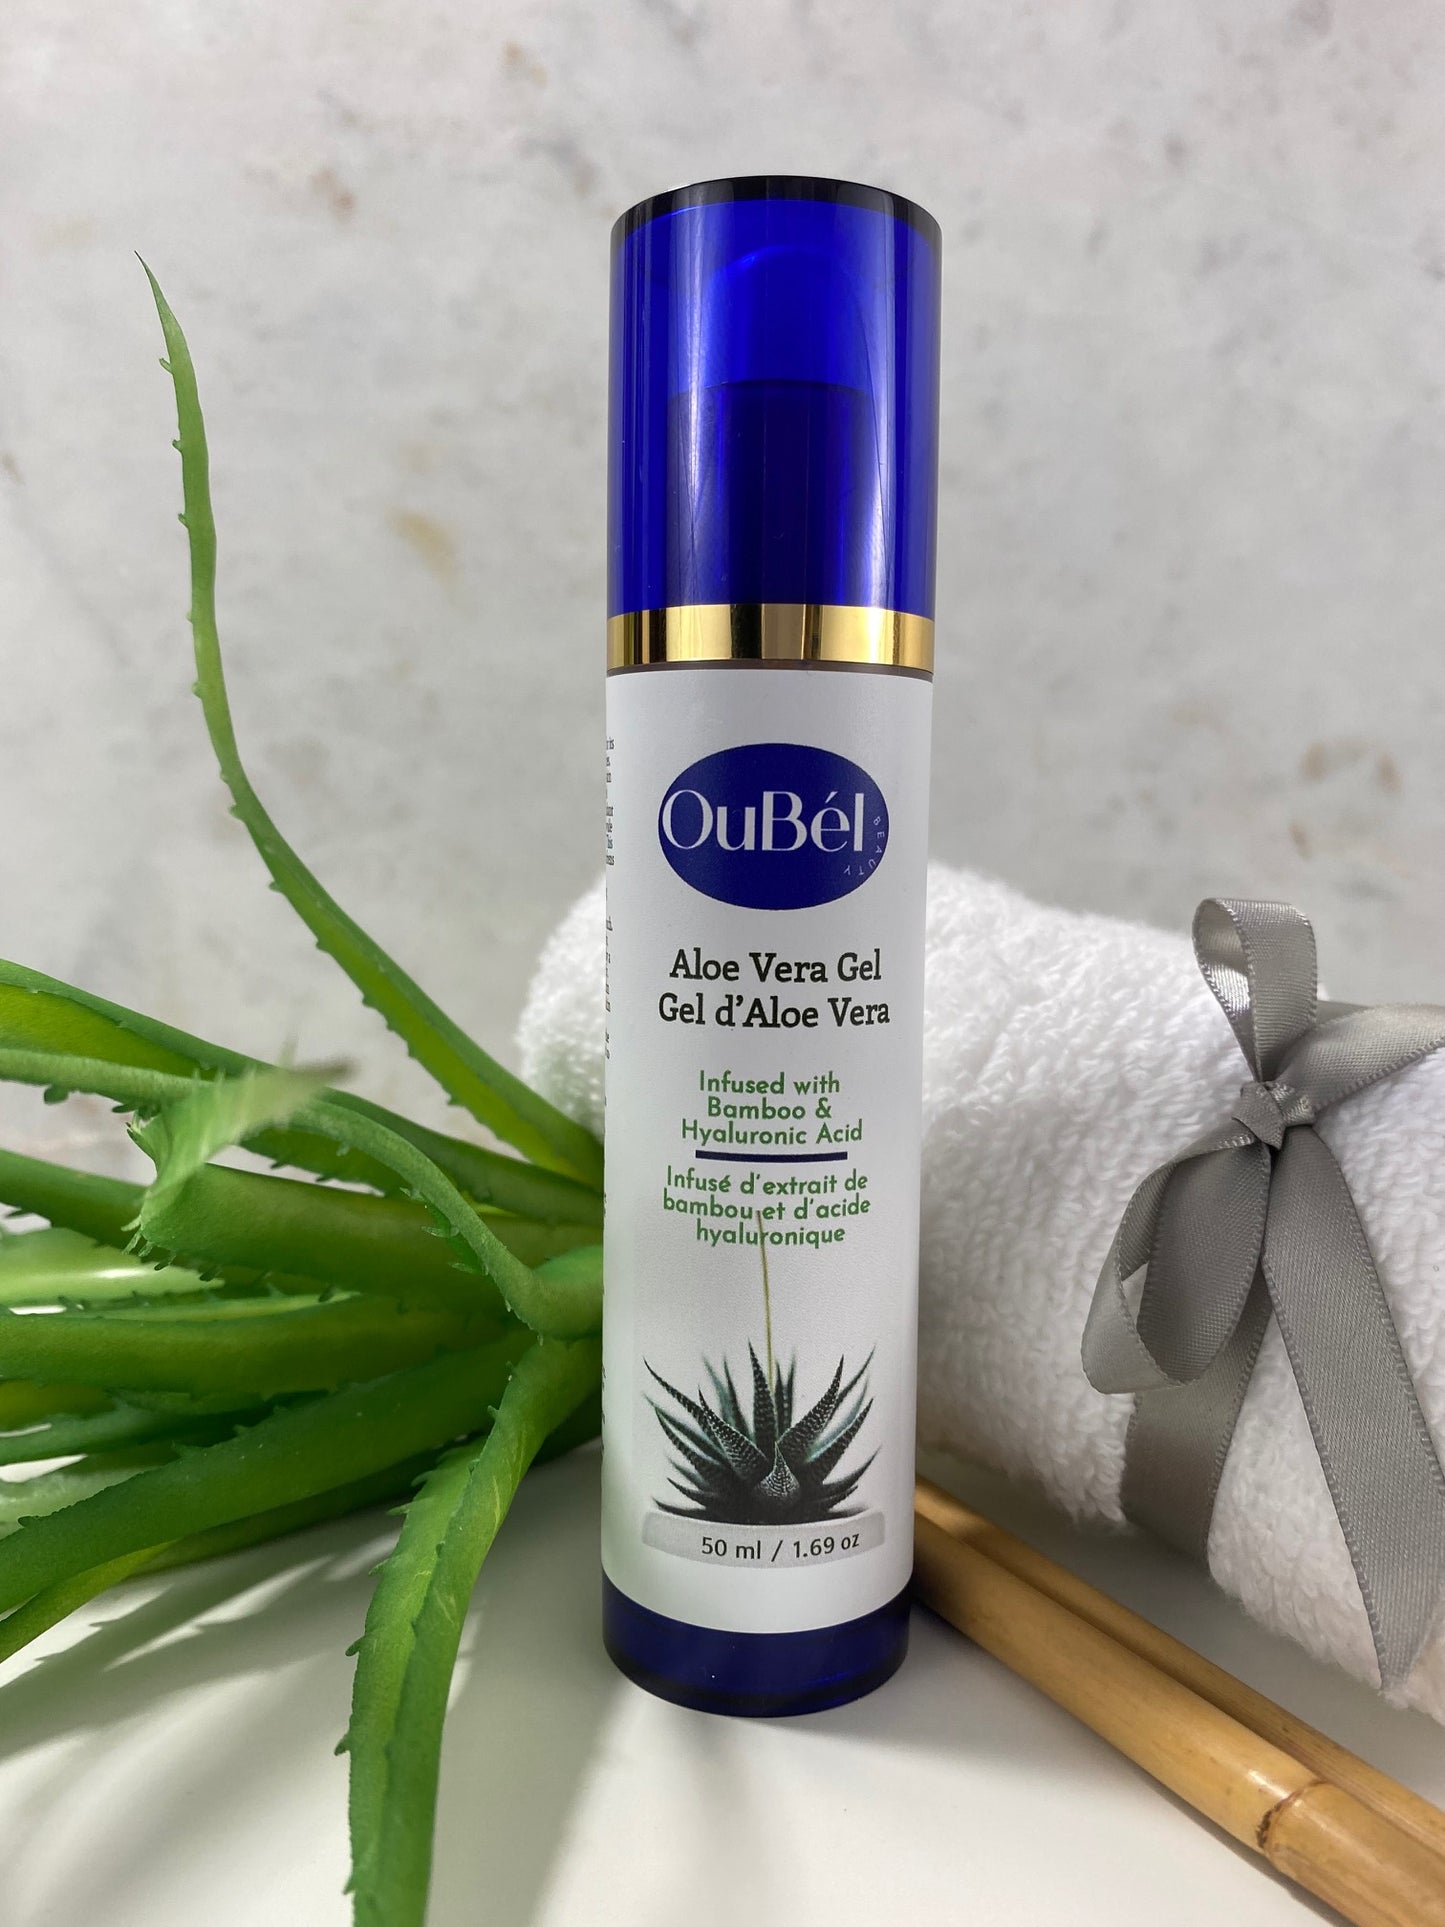 Aloe Vera Gel- Infused with Bamboo & Hyaluronic Acid